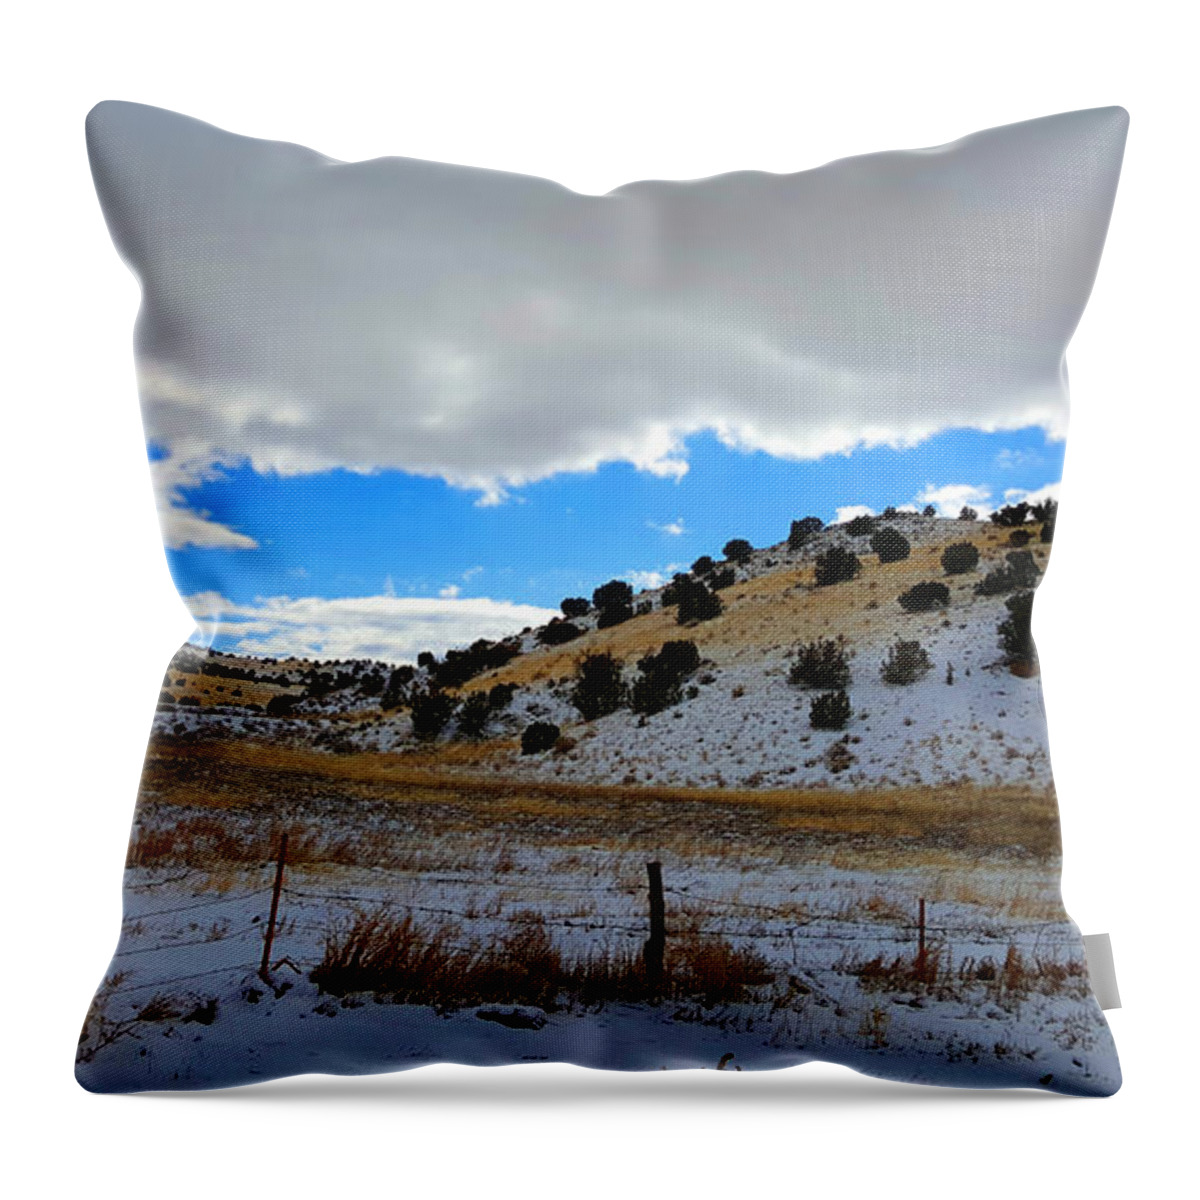 Southwest Landscape Throw Pillow featuring the photograph Snow in the Desert by Robert WK Clark